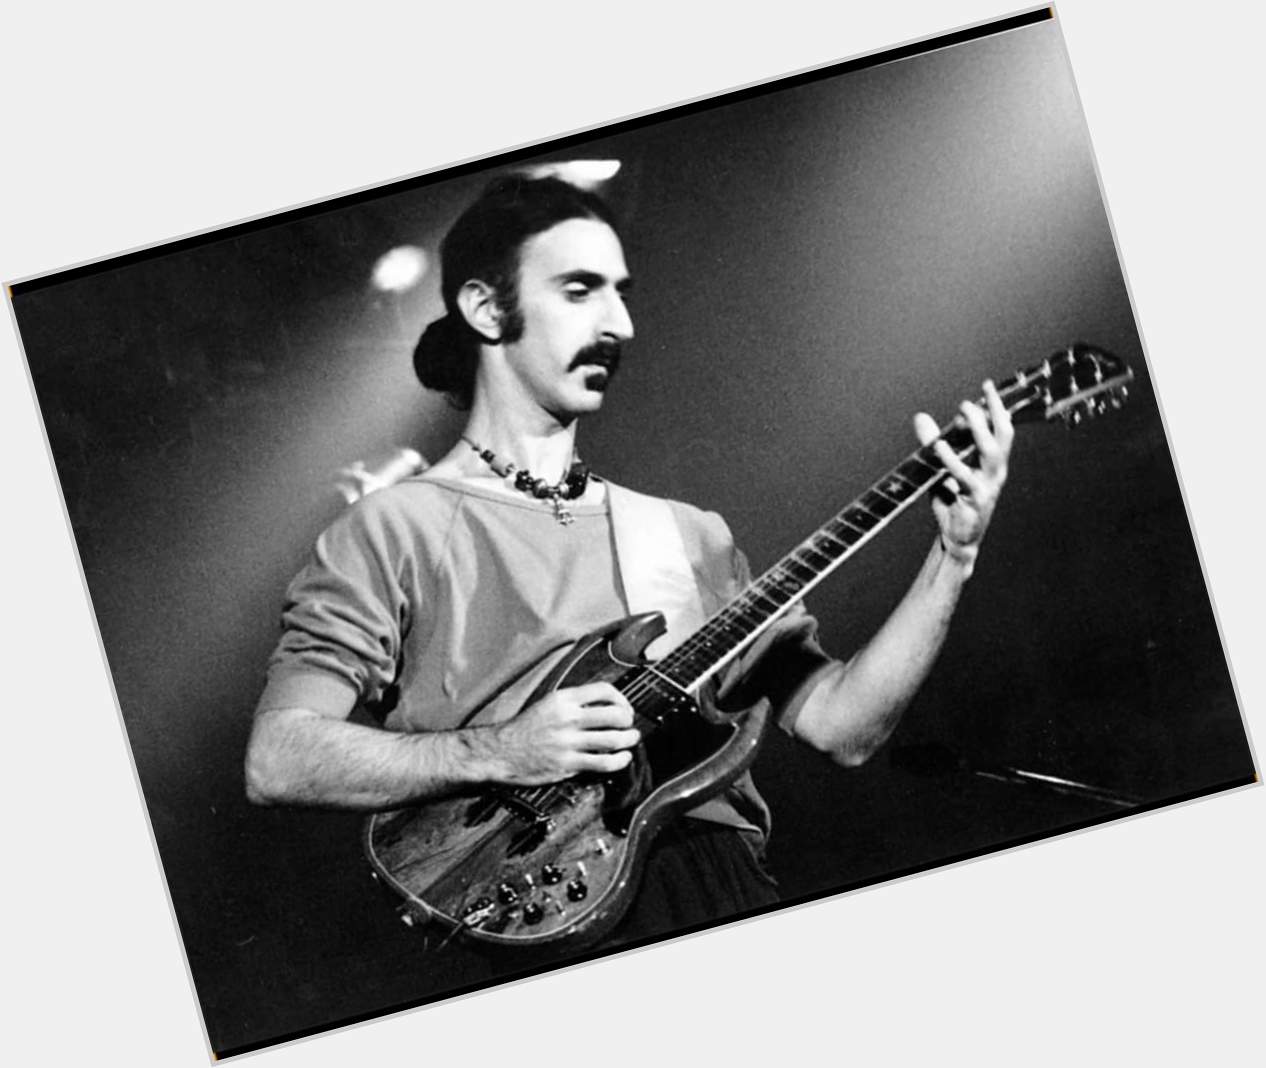 Happy birthday Frank Zappa. He would have turned 82 this day. 
Missing him 